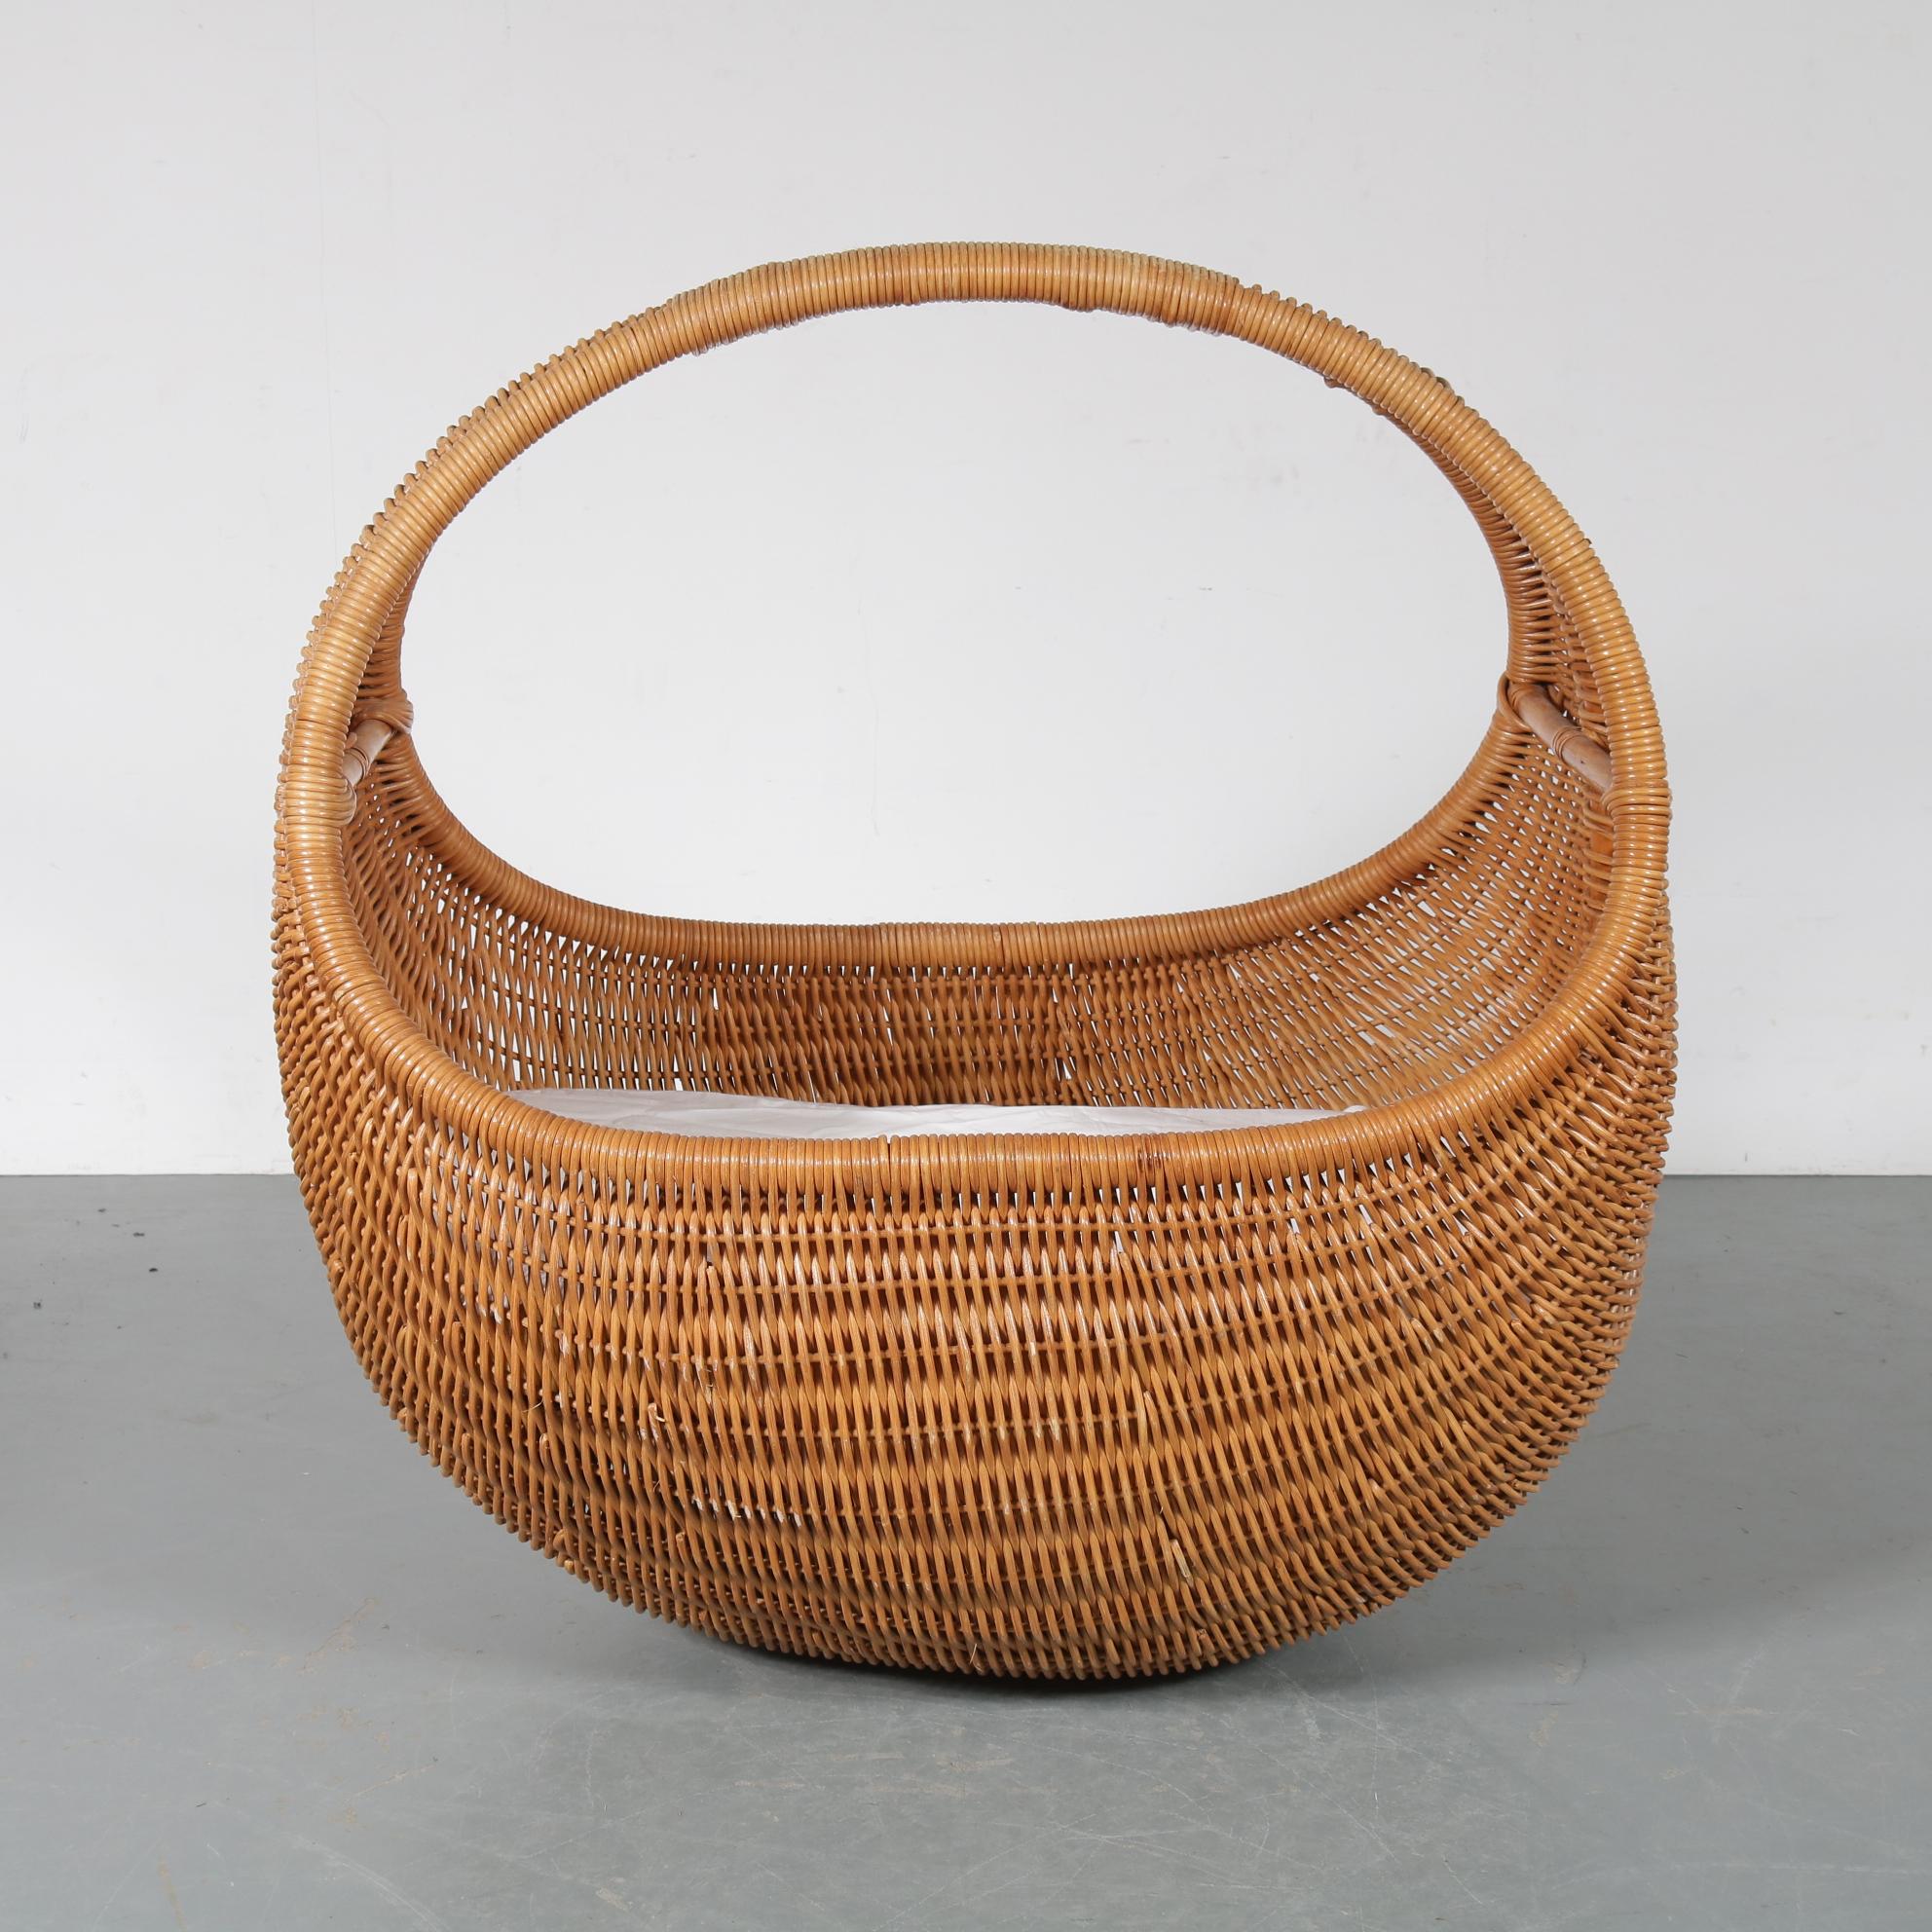 A unique baby basket / bassinet by Dirk van Sliedregt, manufactured by Rohé in the Netherlands, circa 1950.

The basket is very well made of high quality wicker. In a round shape with integrated handle. It has a comfortable white fabric cushion